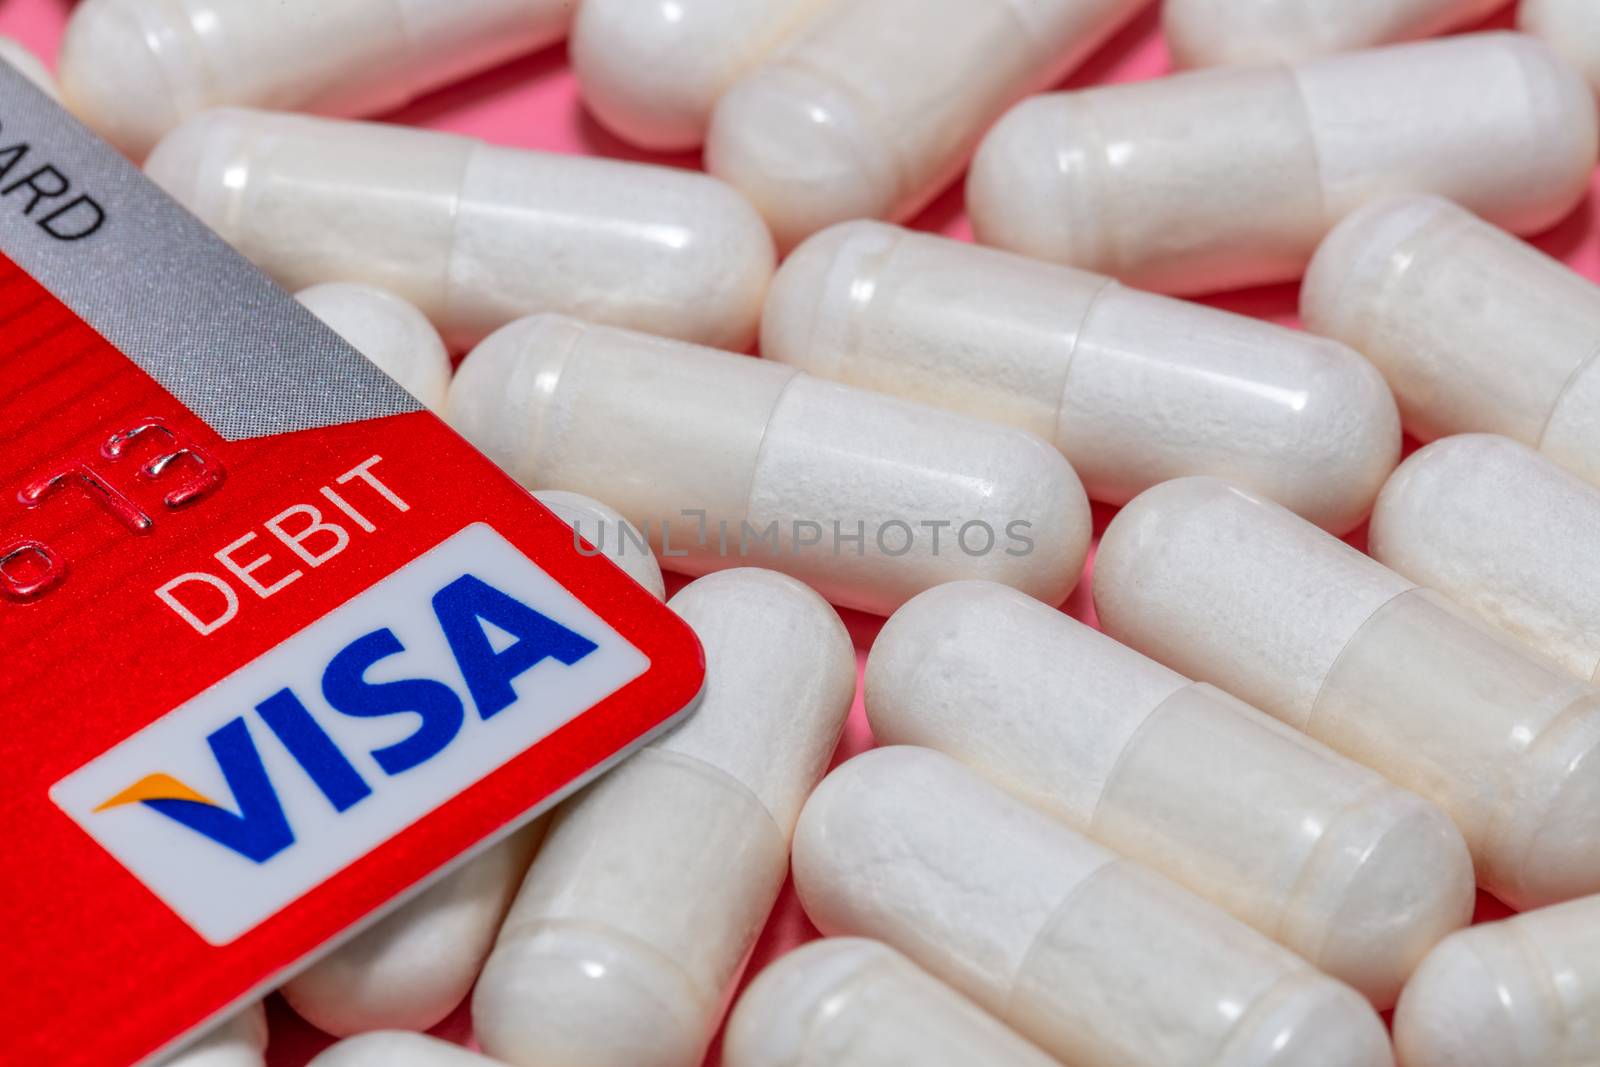 Barnaul, Russia - October 13, 2020: High angle close up shot of corner of a red visa debit card, white pills on pink background. Close up shot. Healthcare, pharmaceutical business, commerce concepts by DamantisZ